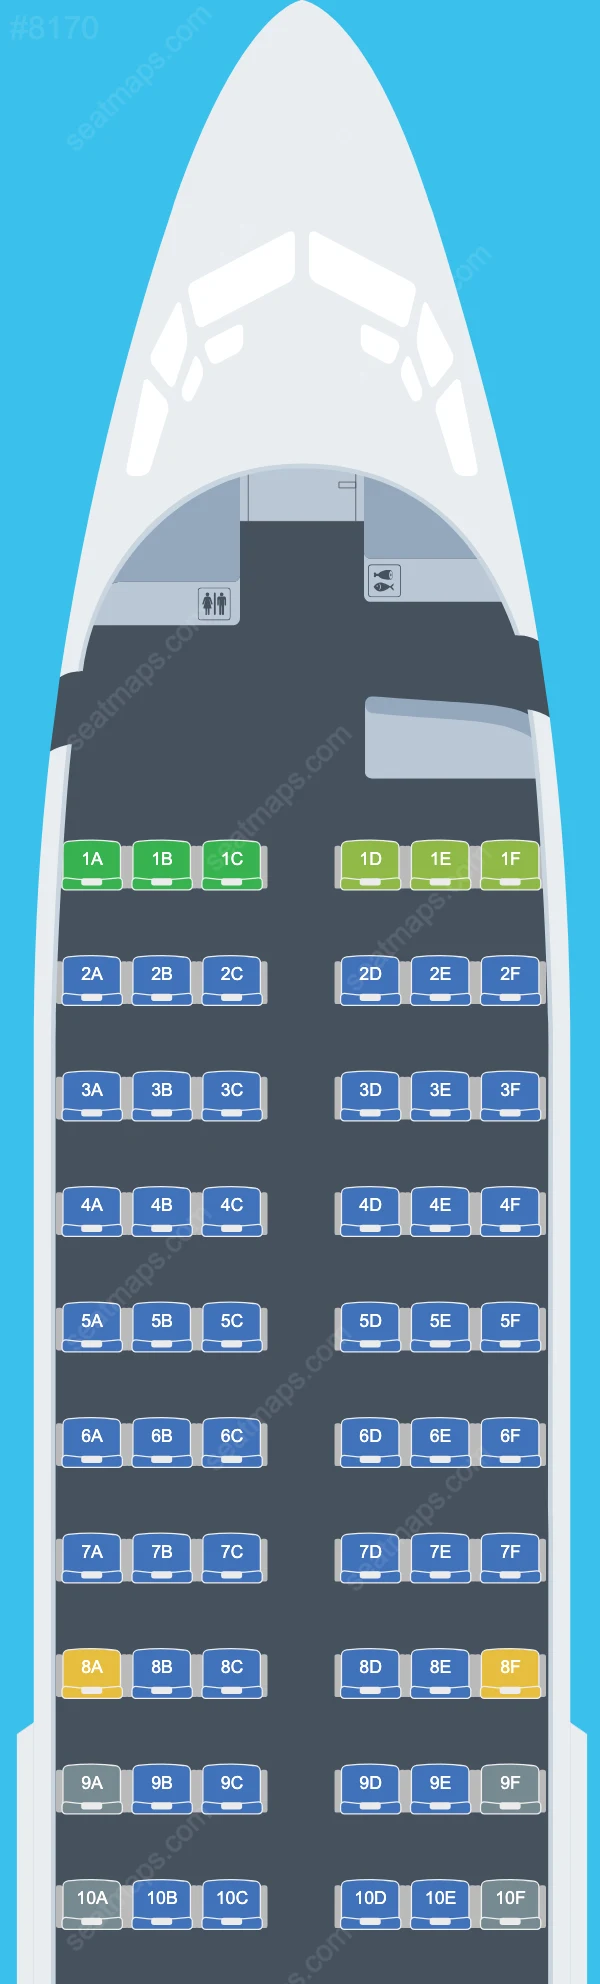 Fly Baghdad Boeing 737 Seat Maps 737-700